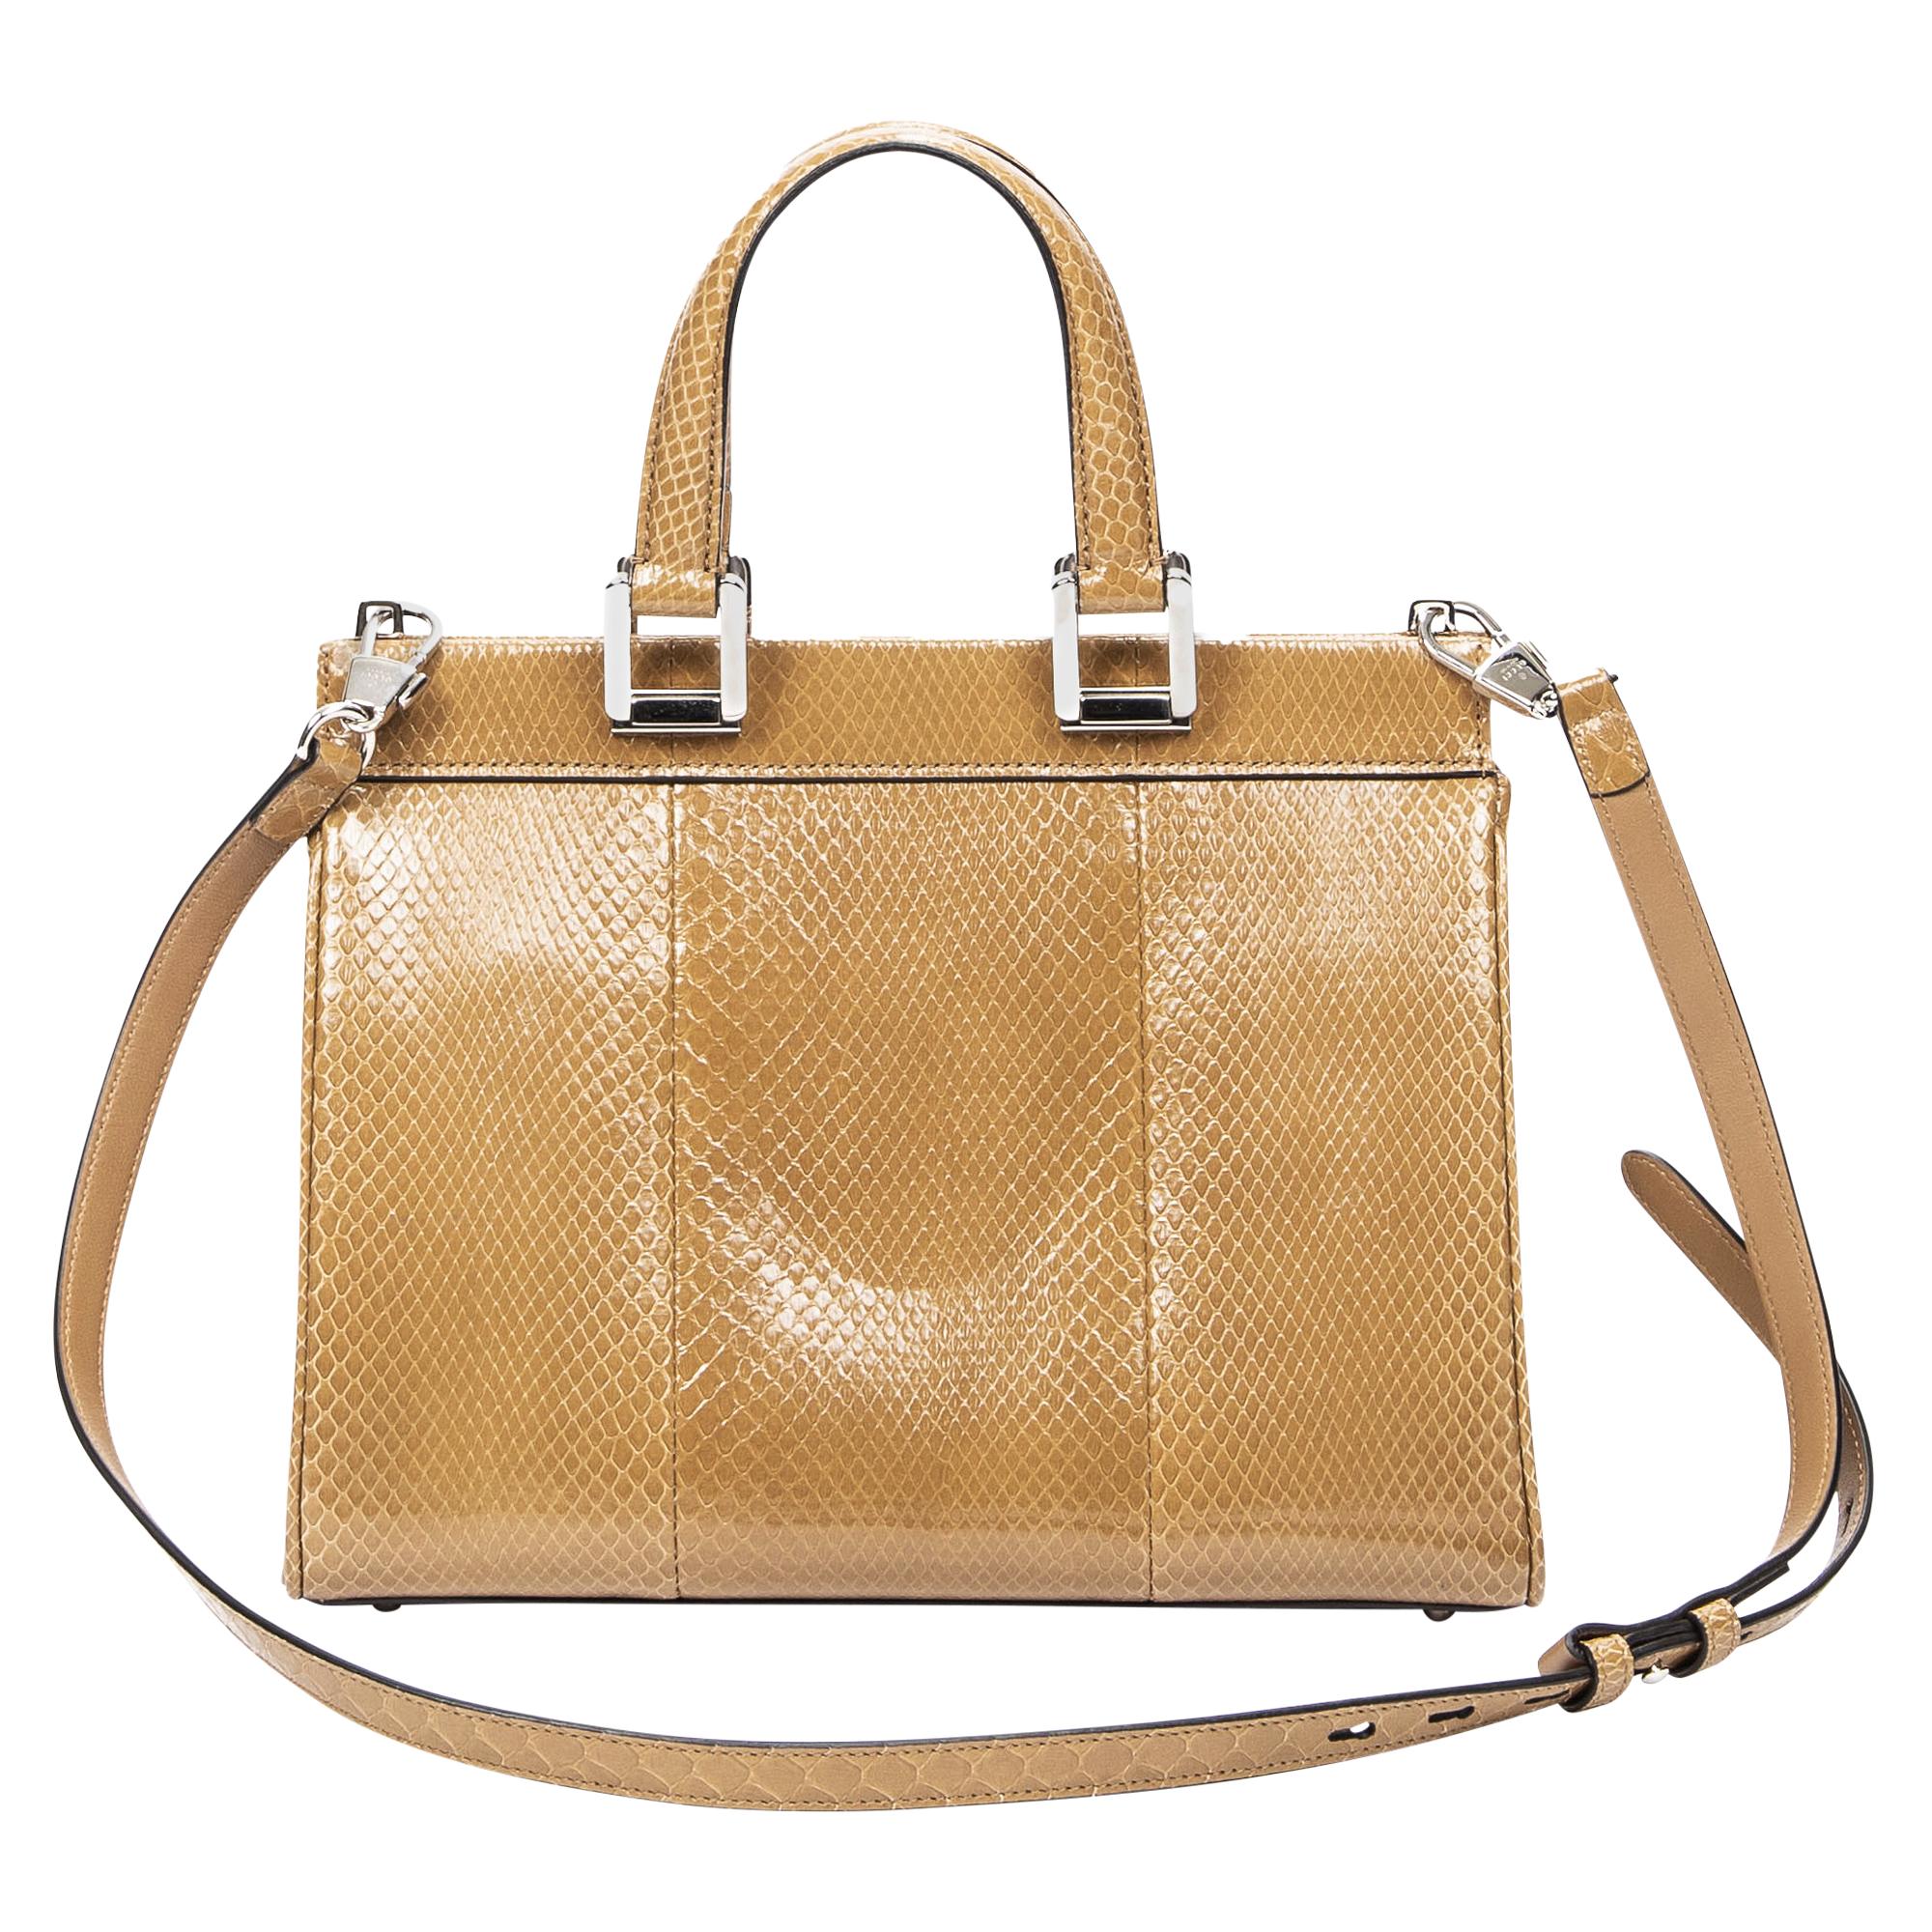 Gucci Beige Snakeskin Small Top Handle Bag In Excellent Condition For Sale In Atlanta, GA